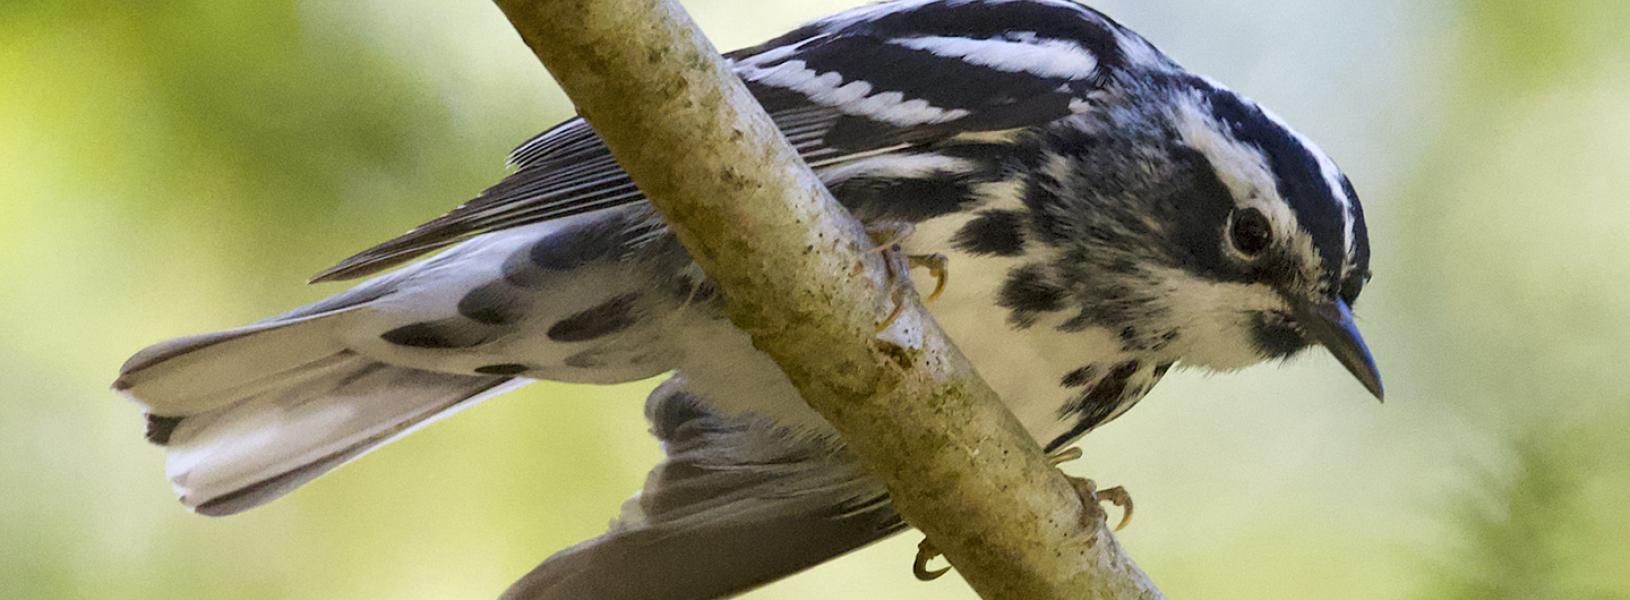 Black and white warbler bird looking down from a branch